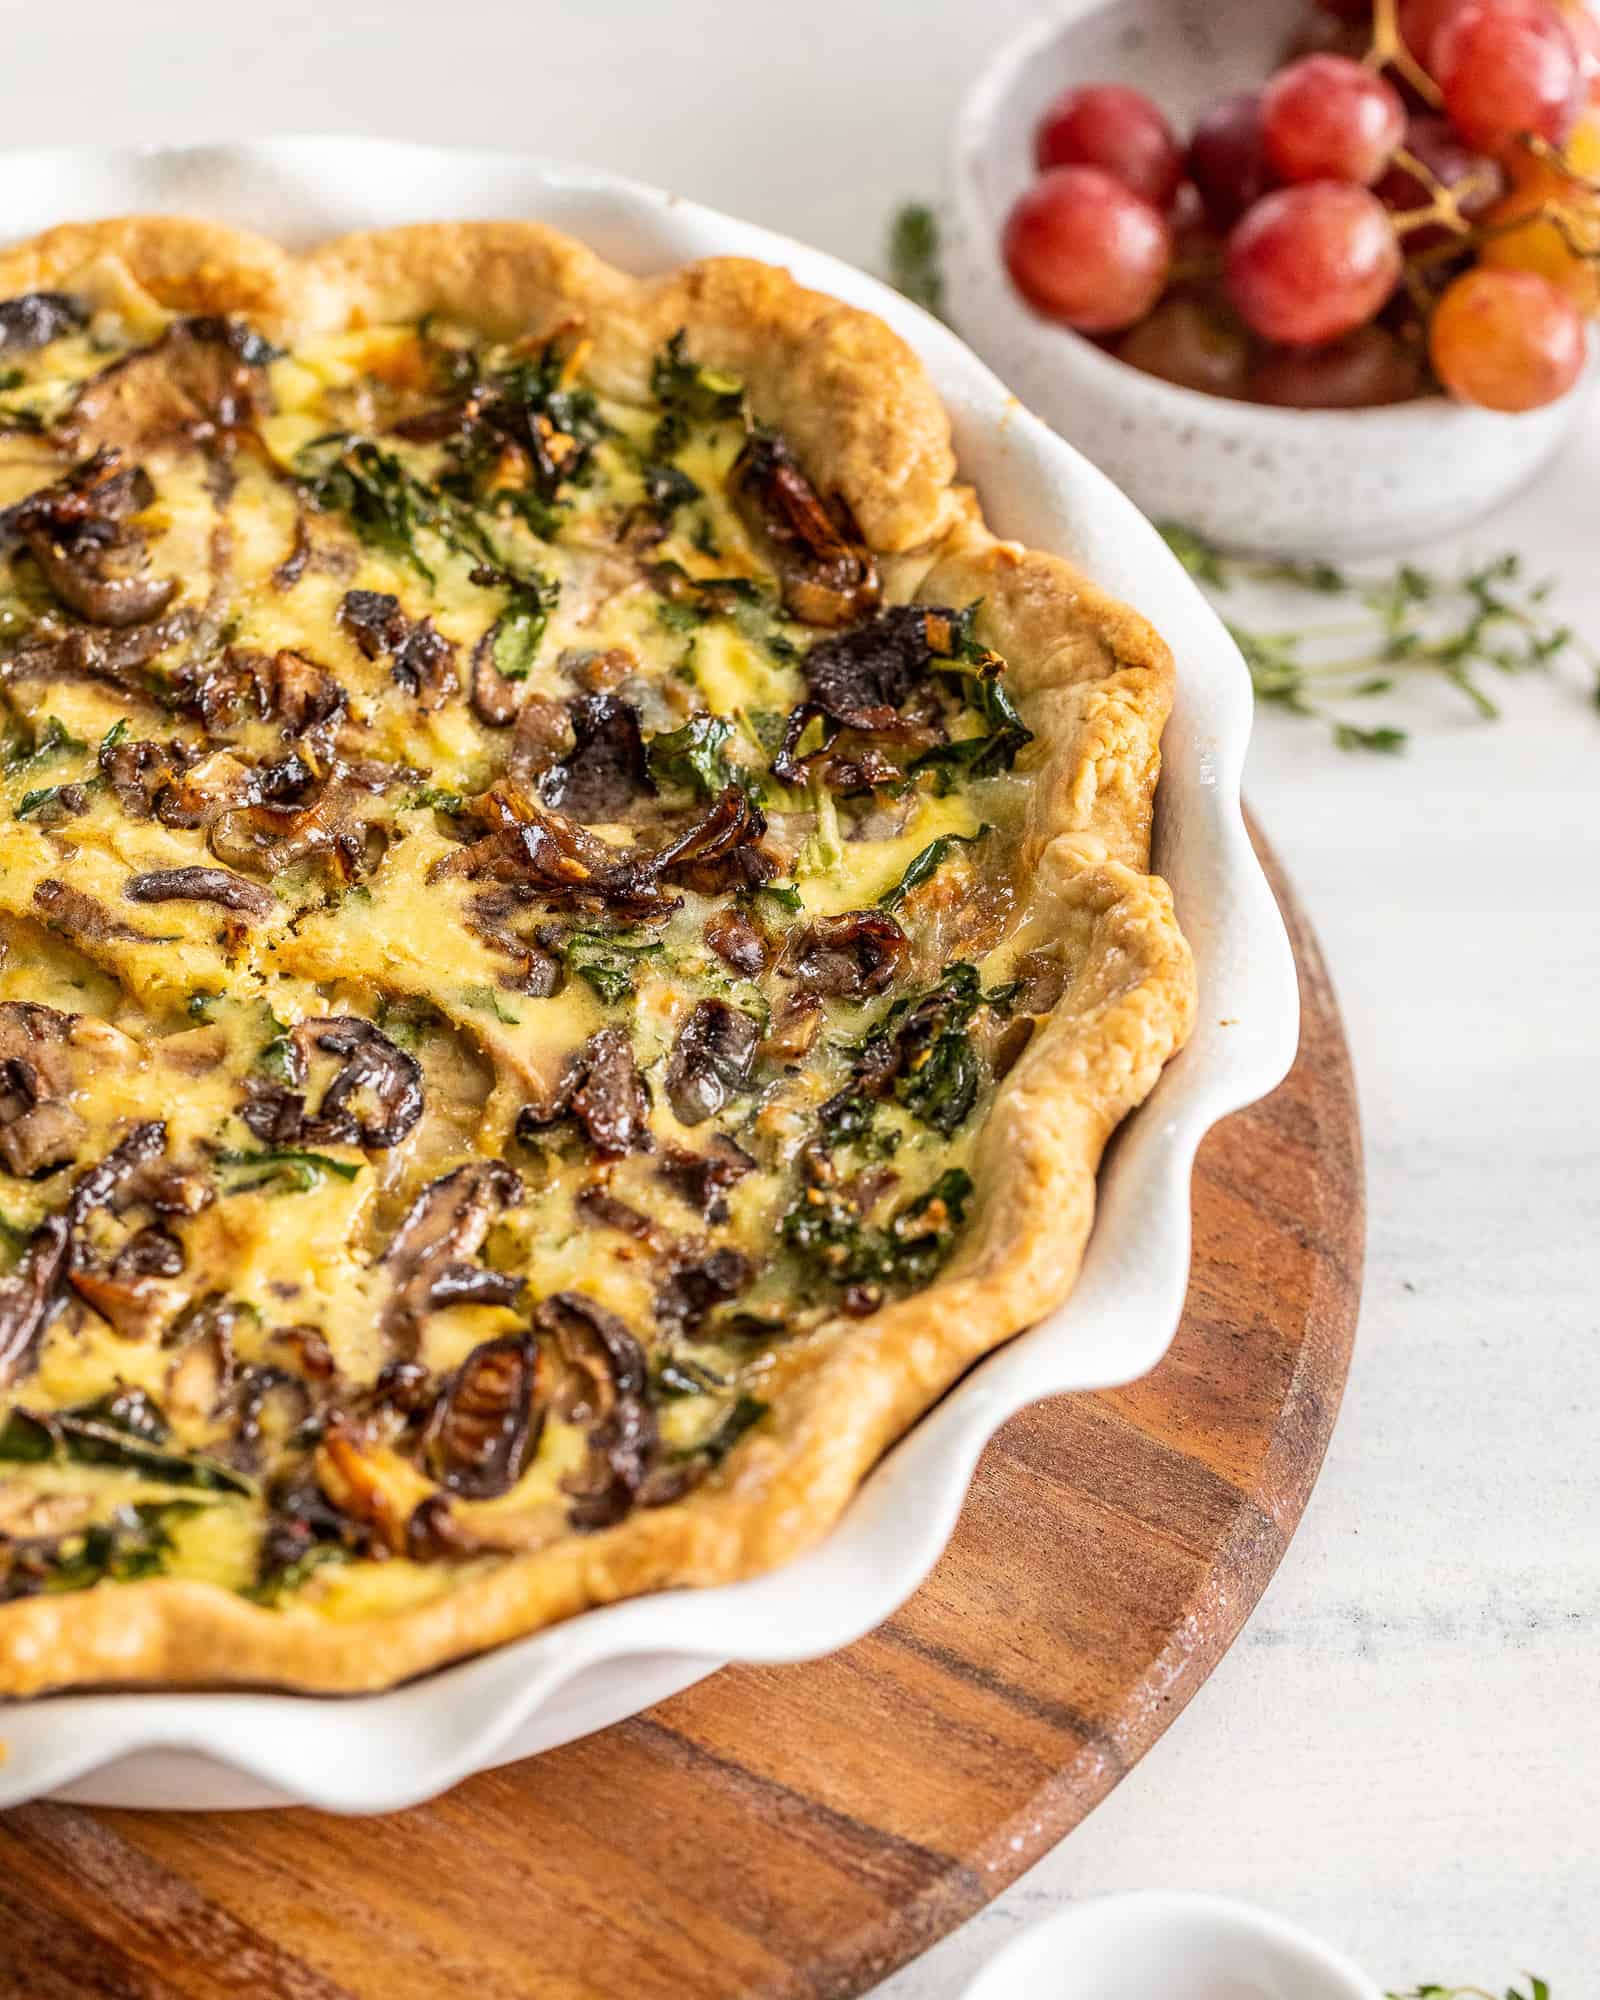 Close up view of a plated Kale and Mushroom Quiche and a bowl of tomatoes in the background